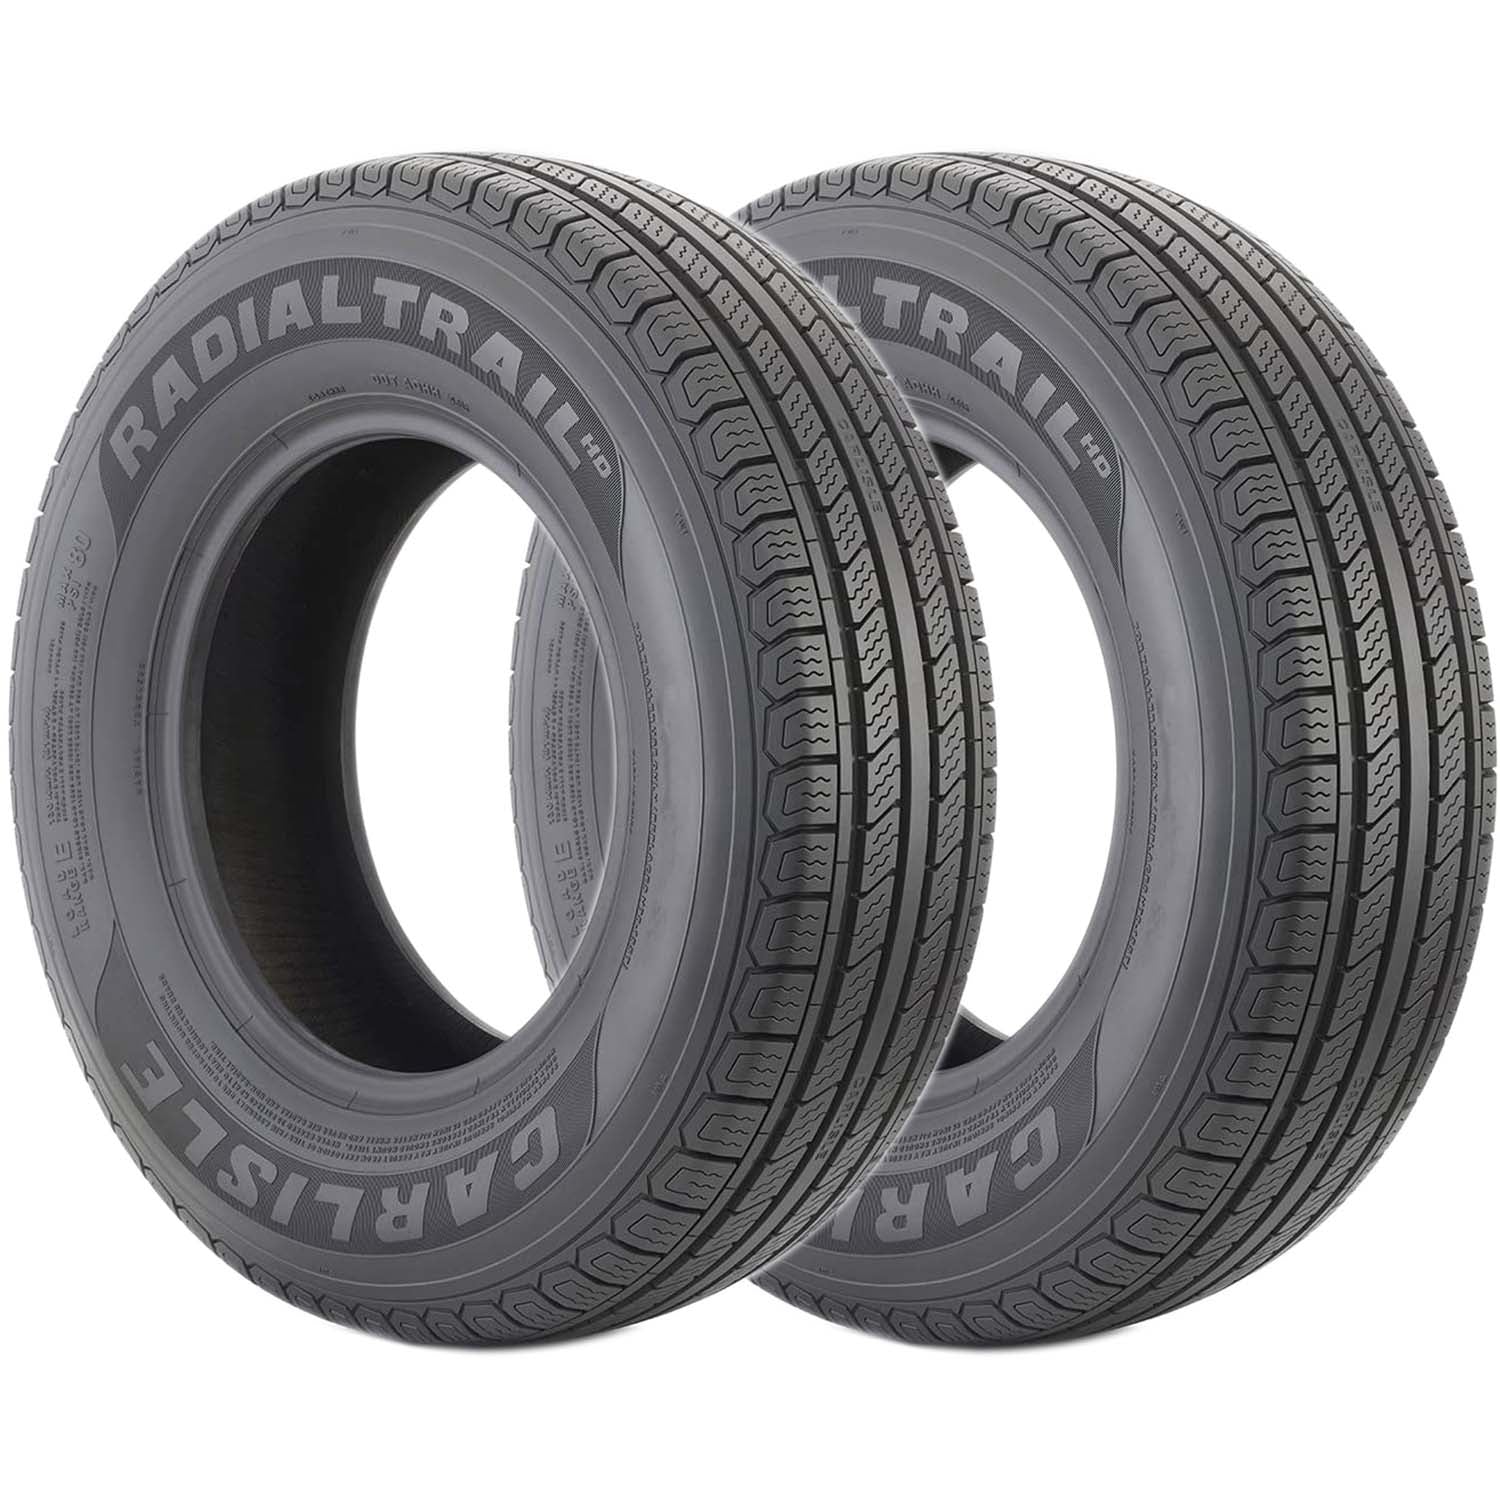 Carlisle Radial Trail HD Trailer Tire LRD 8ply ST175/80R13 Pack of 2